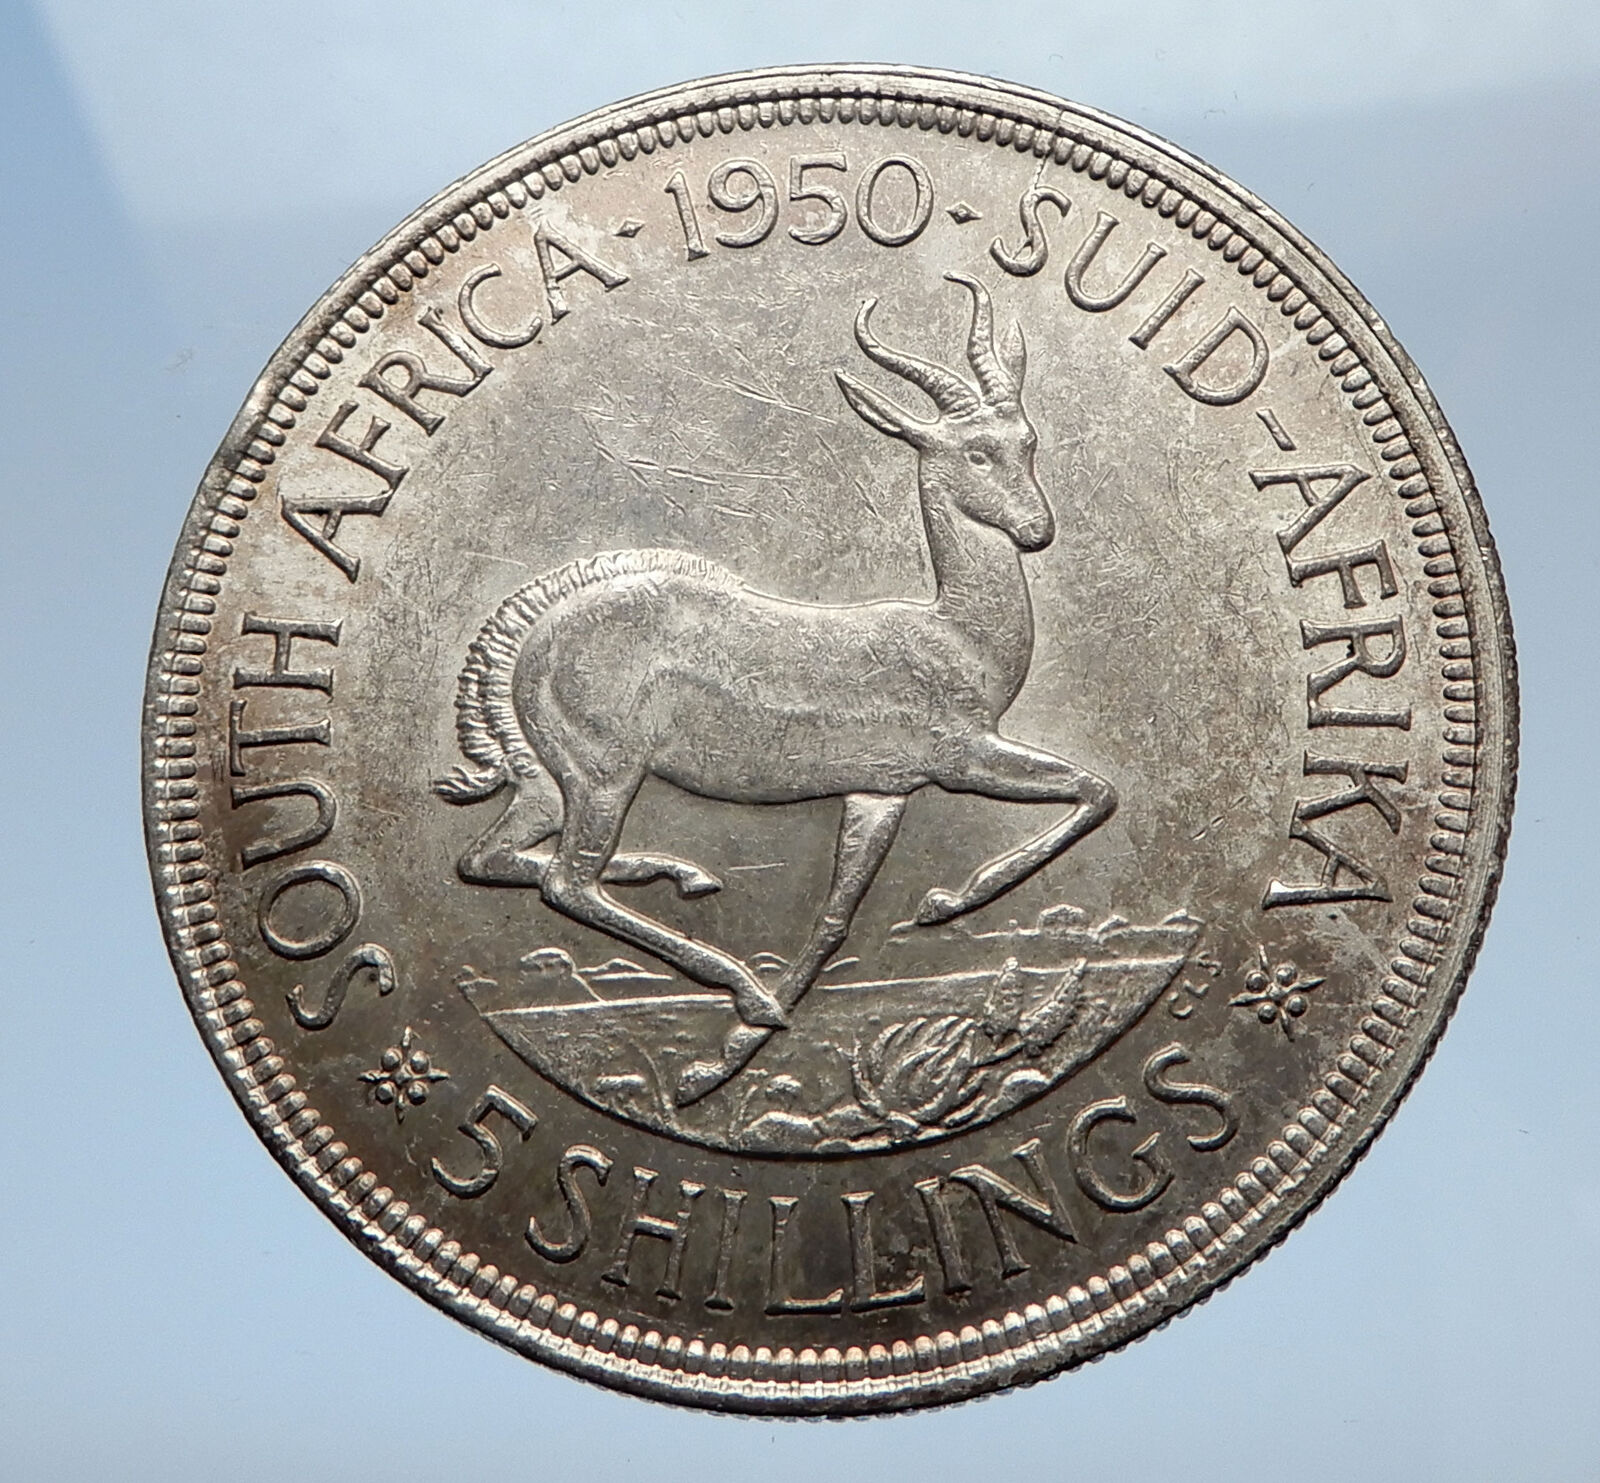 1950 SOUTH AFRICA Large Silver 5 Shillings Coin GEORGE VI SPRINGBOK Deer i69424